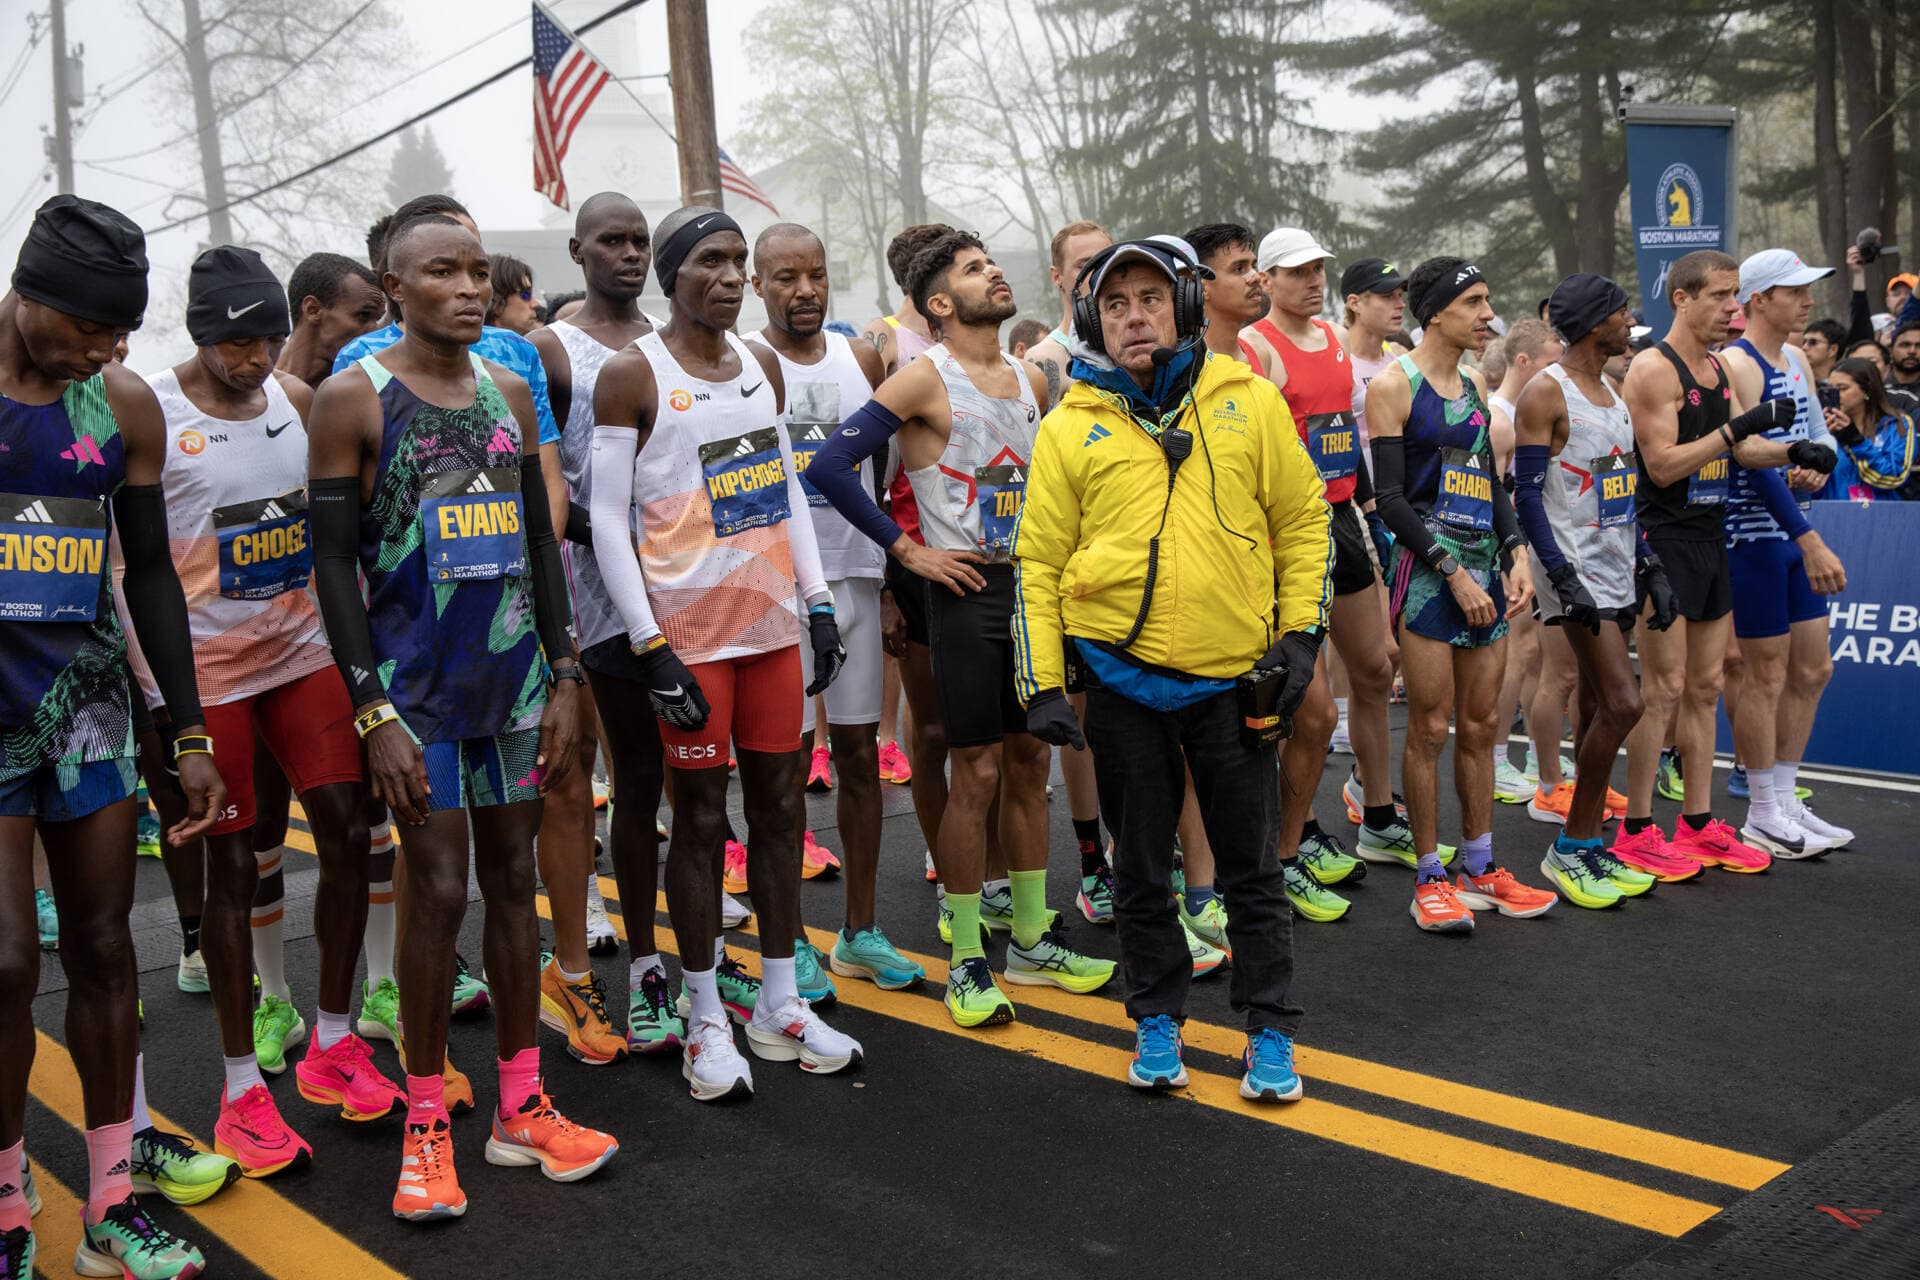 The men's professional field approaches the starting line at the 127th Boston Marathon. (Robin Lubbock/WBUR)